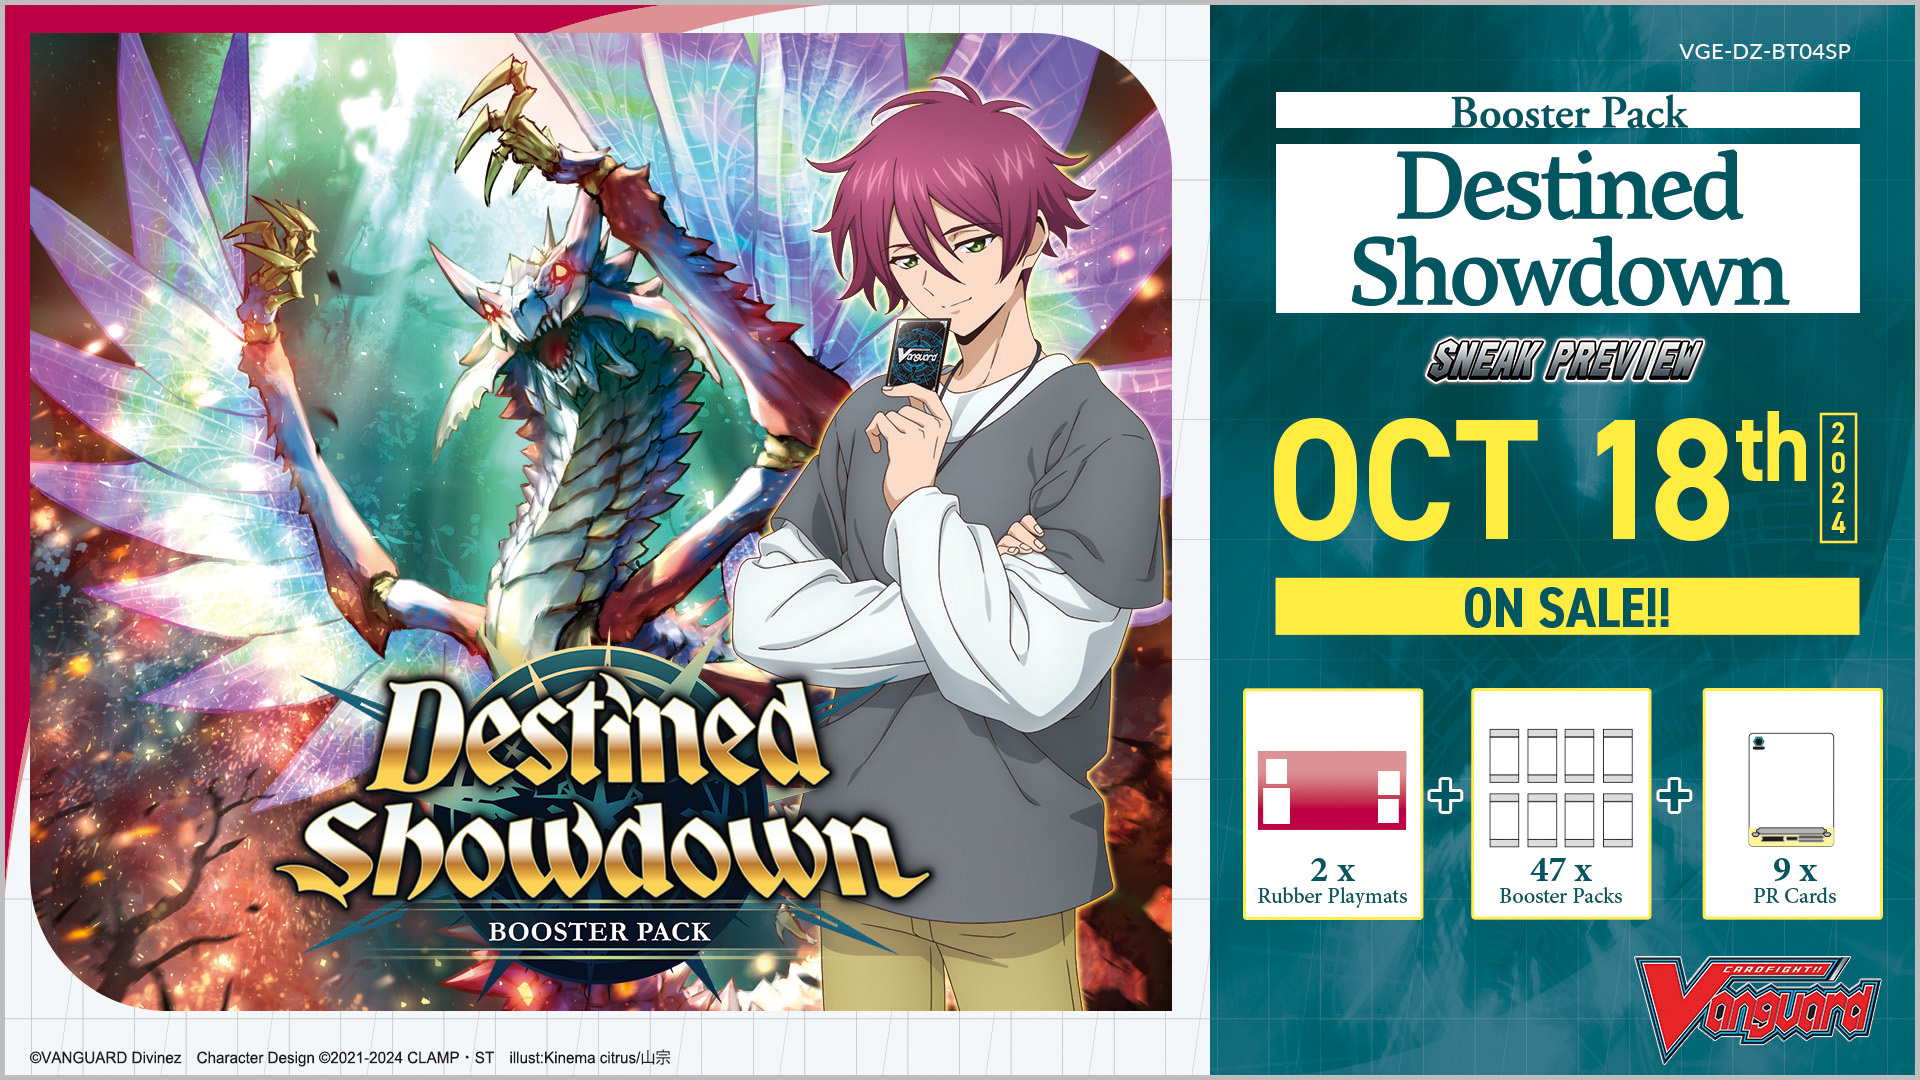 Cardfight!! Vanguard Booster Pack Destined Showdown Sneak Preview